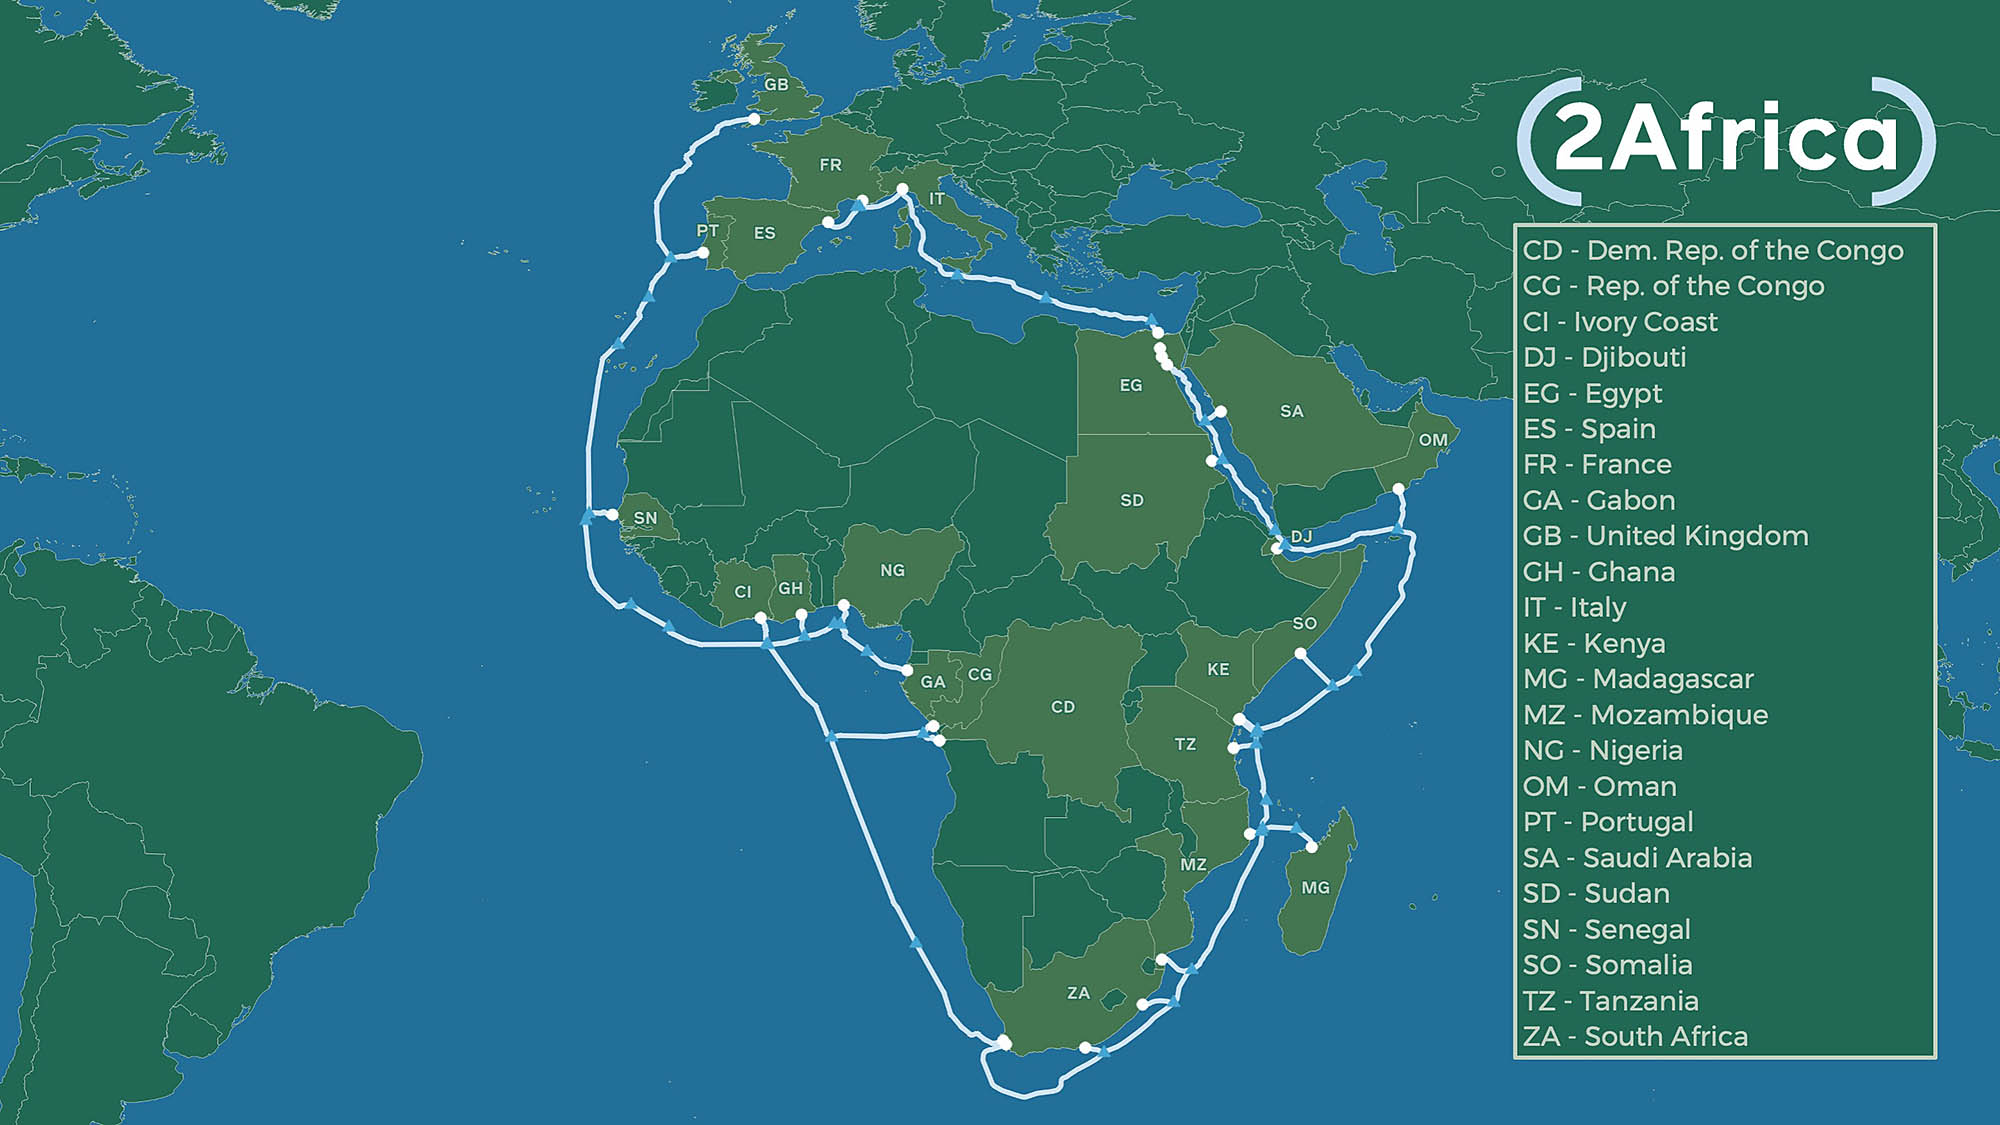 Facebook, telcos to build huge subsea cable for Africa and Middle East